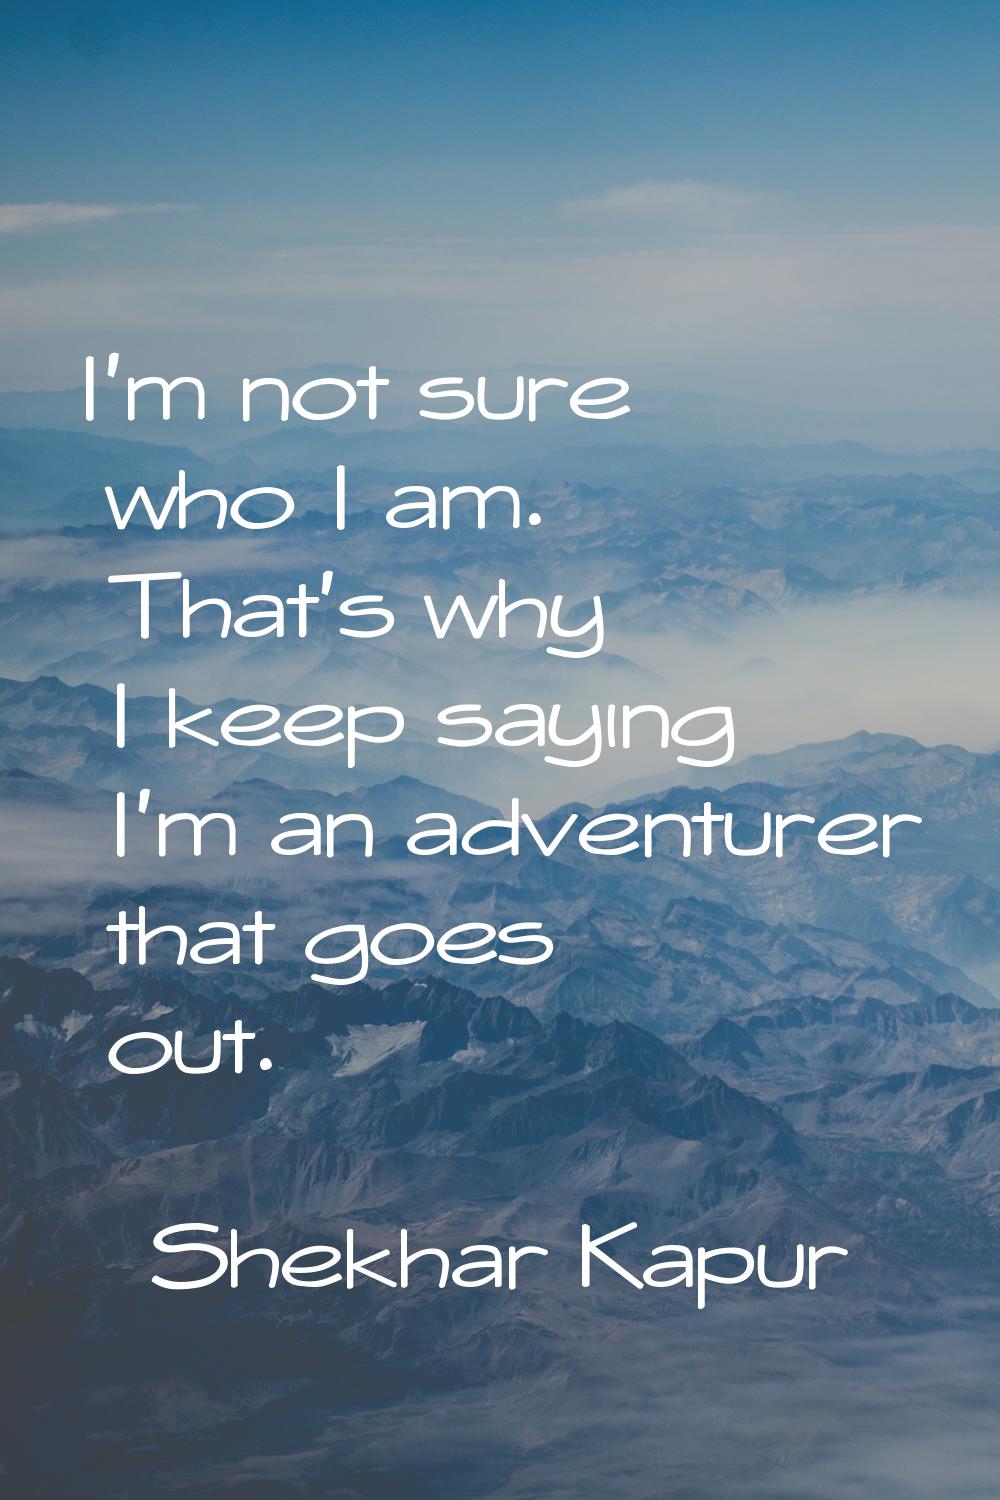 I'm not sure who I am. That's why I keep saying I'm an adventurer that goes out.